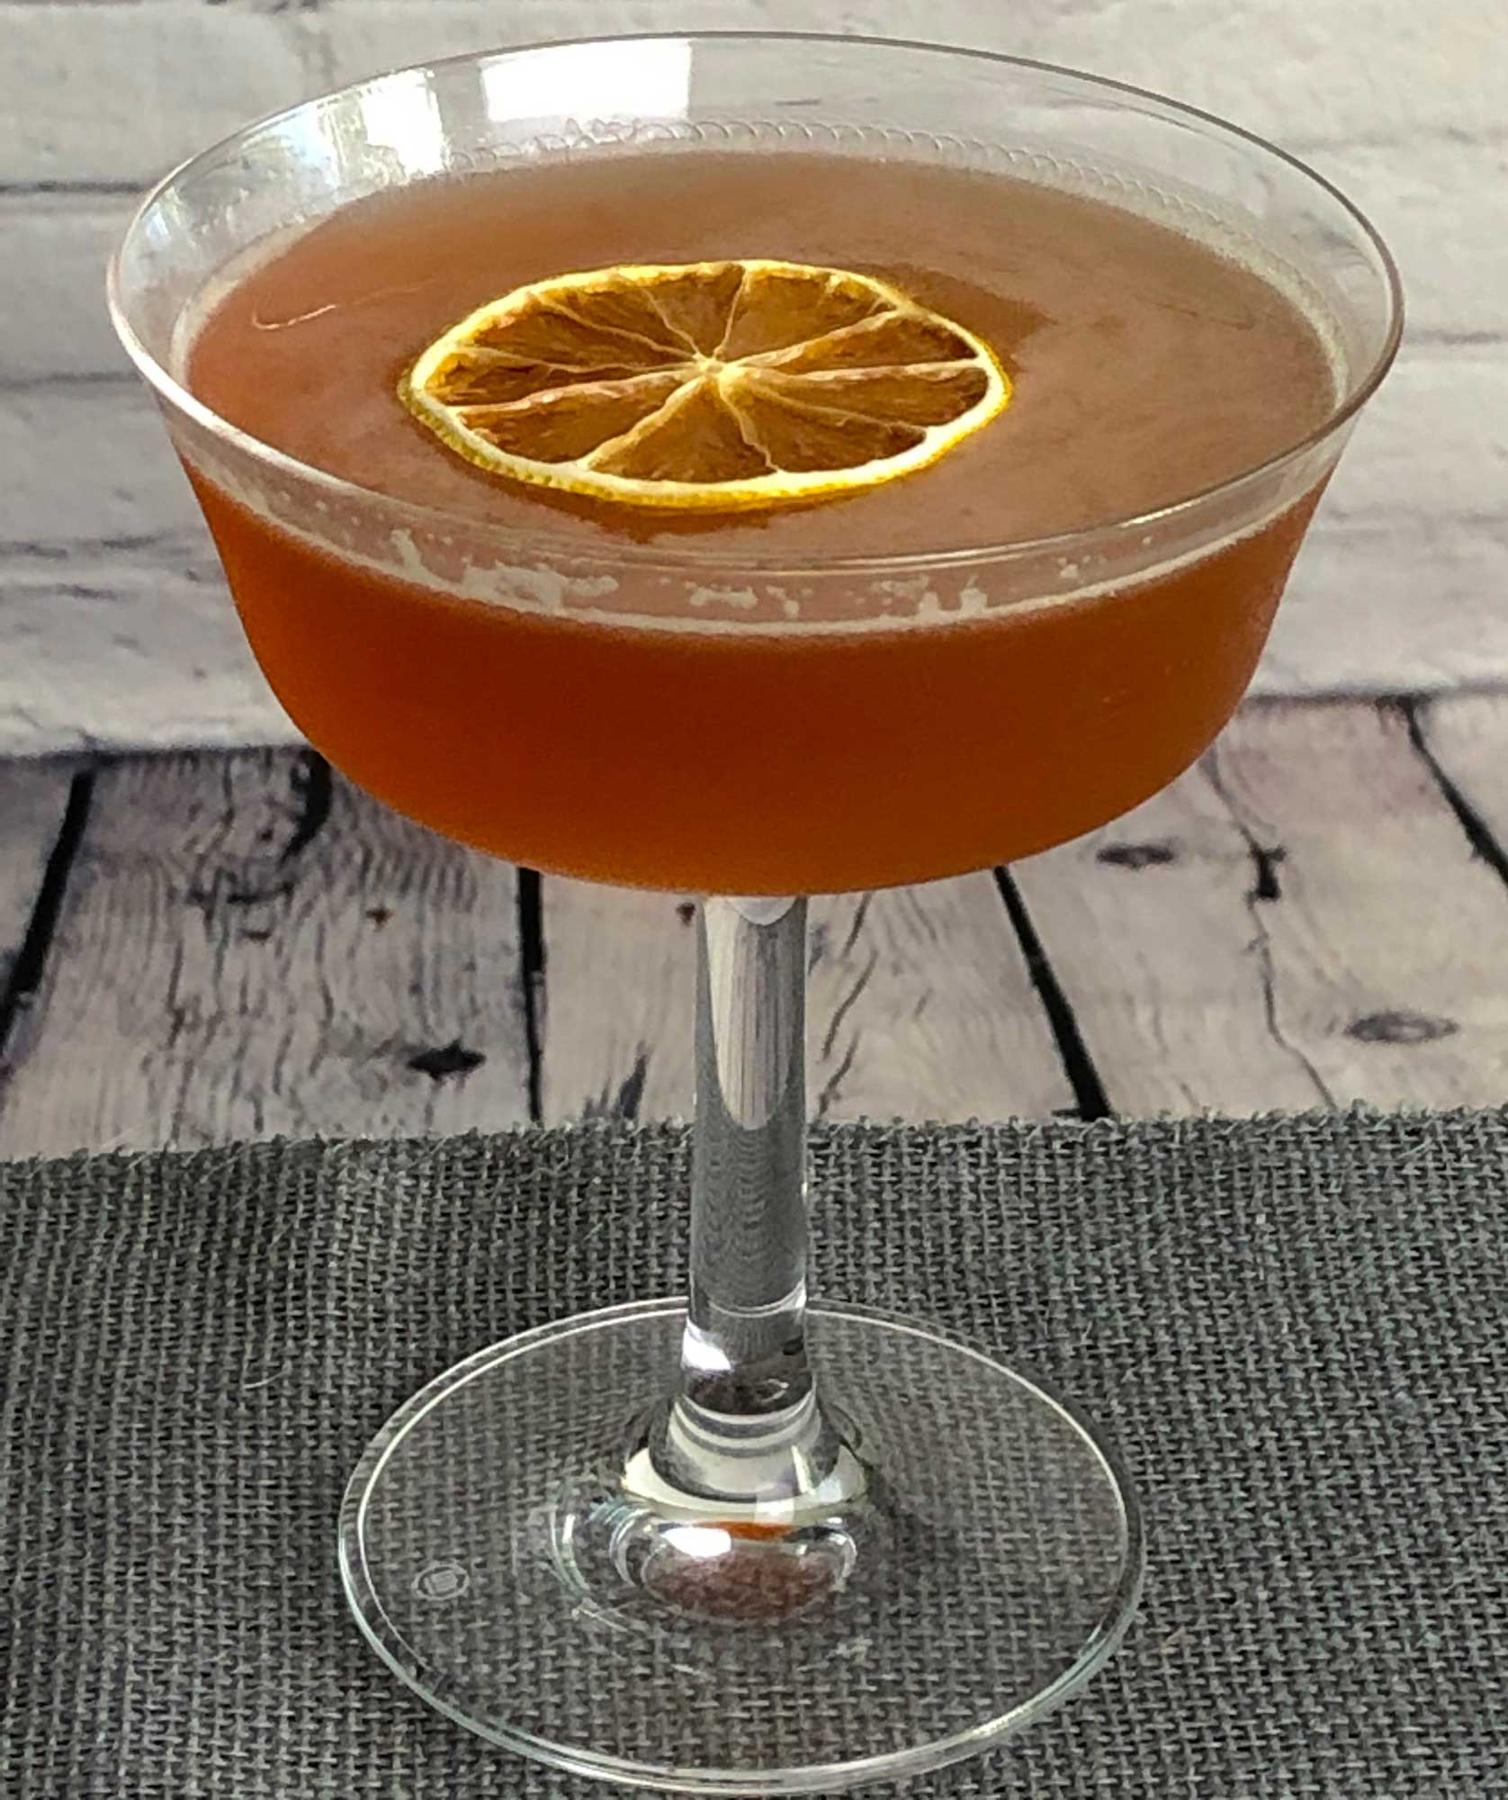 An example of the Hi-Hat Cocktail, the mixed drink (drink), variation of a drink from David Embury, The Fine Art of Mixing Drinks, featuring rye whiskey, Rothman & Winter Orchard Cherry Liqueur, lemon juice, and lemon twist; photo by Lee Edwards